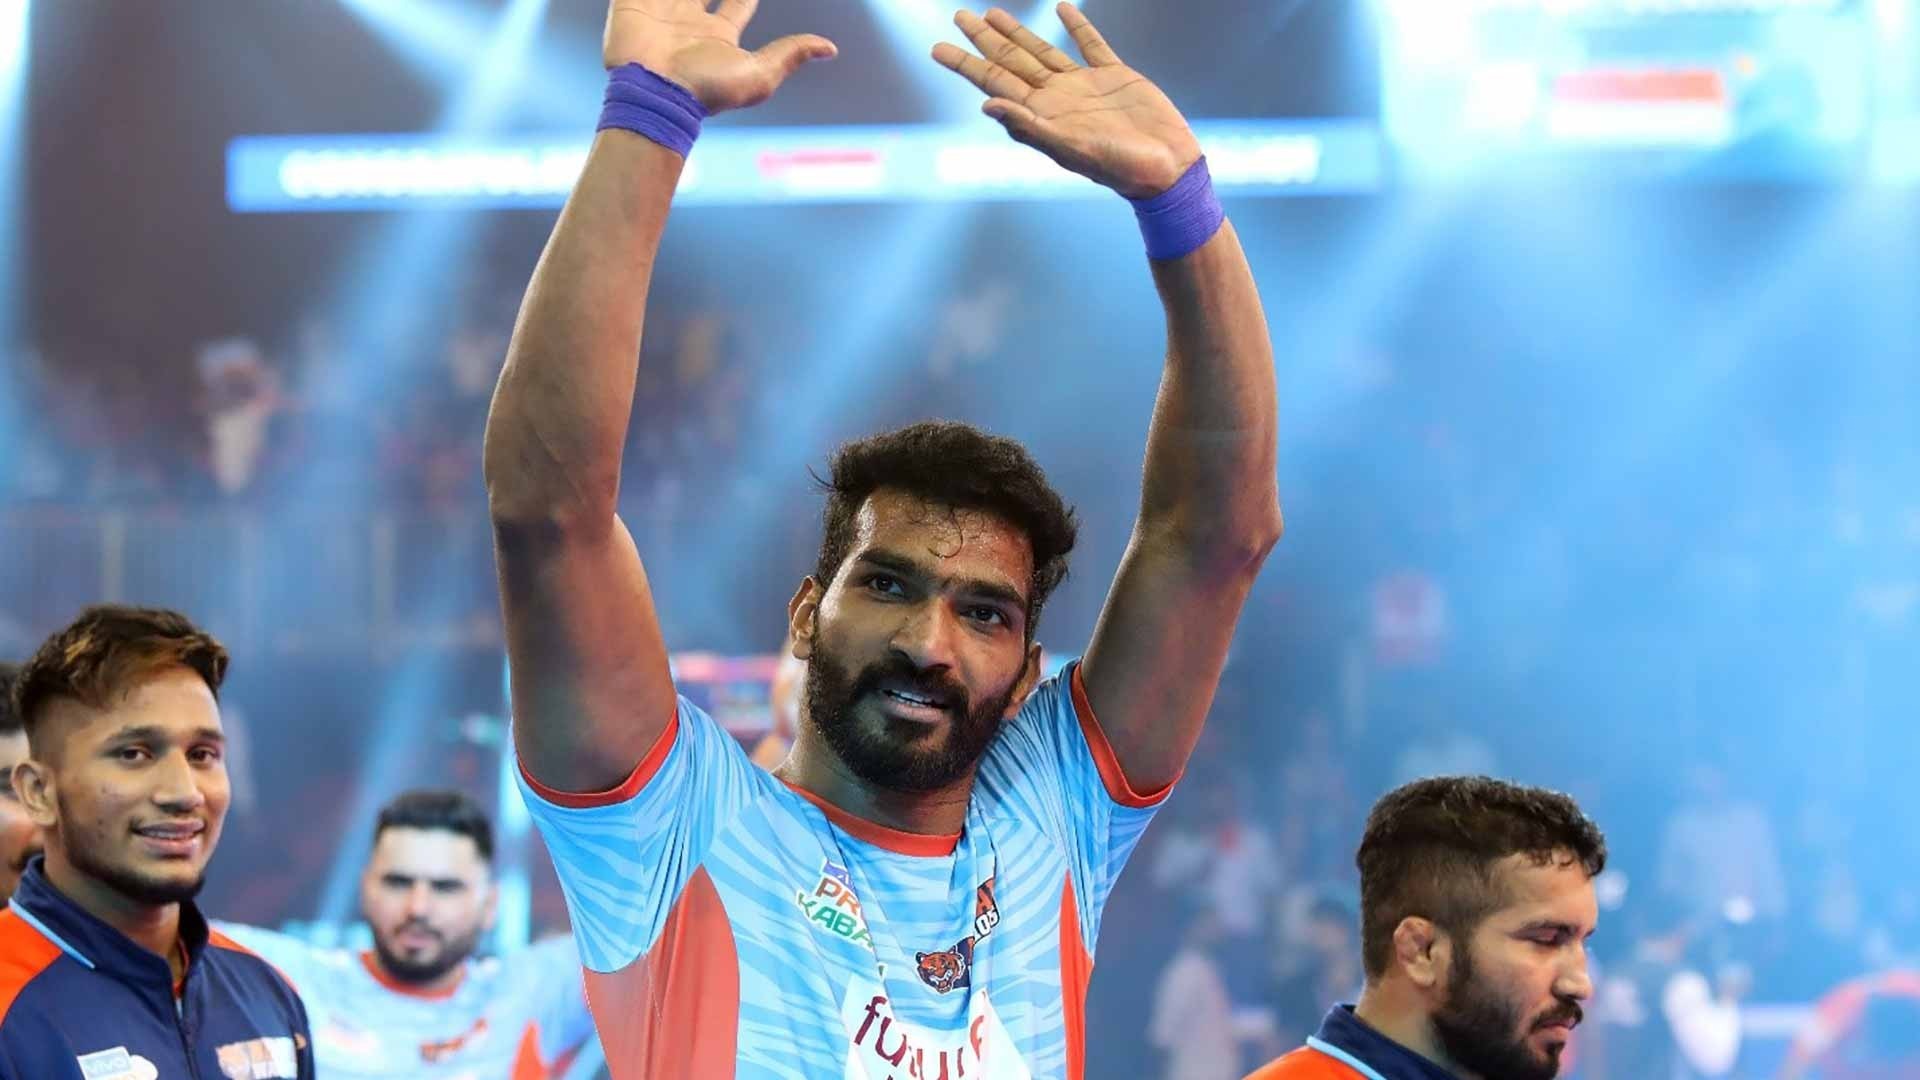 PKL 2019 | Very happy that we have made it to final, says Sukesh Hegde